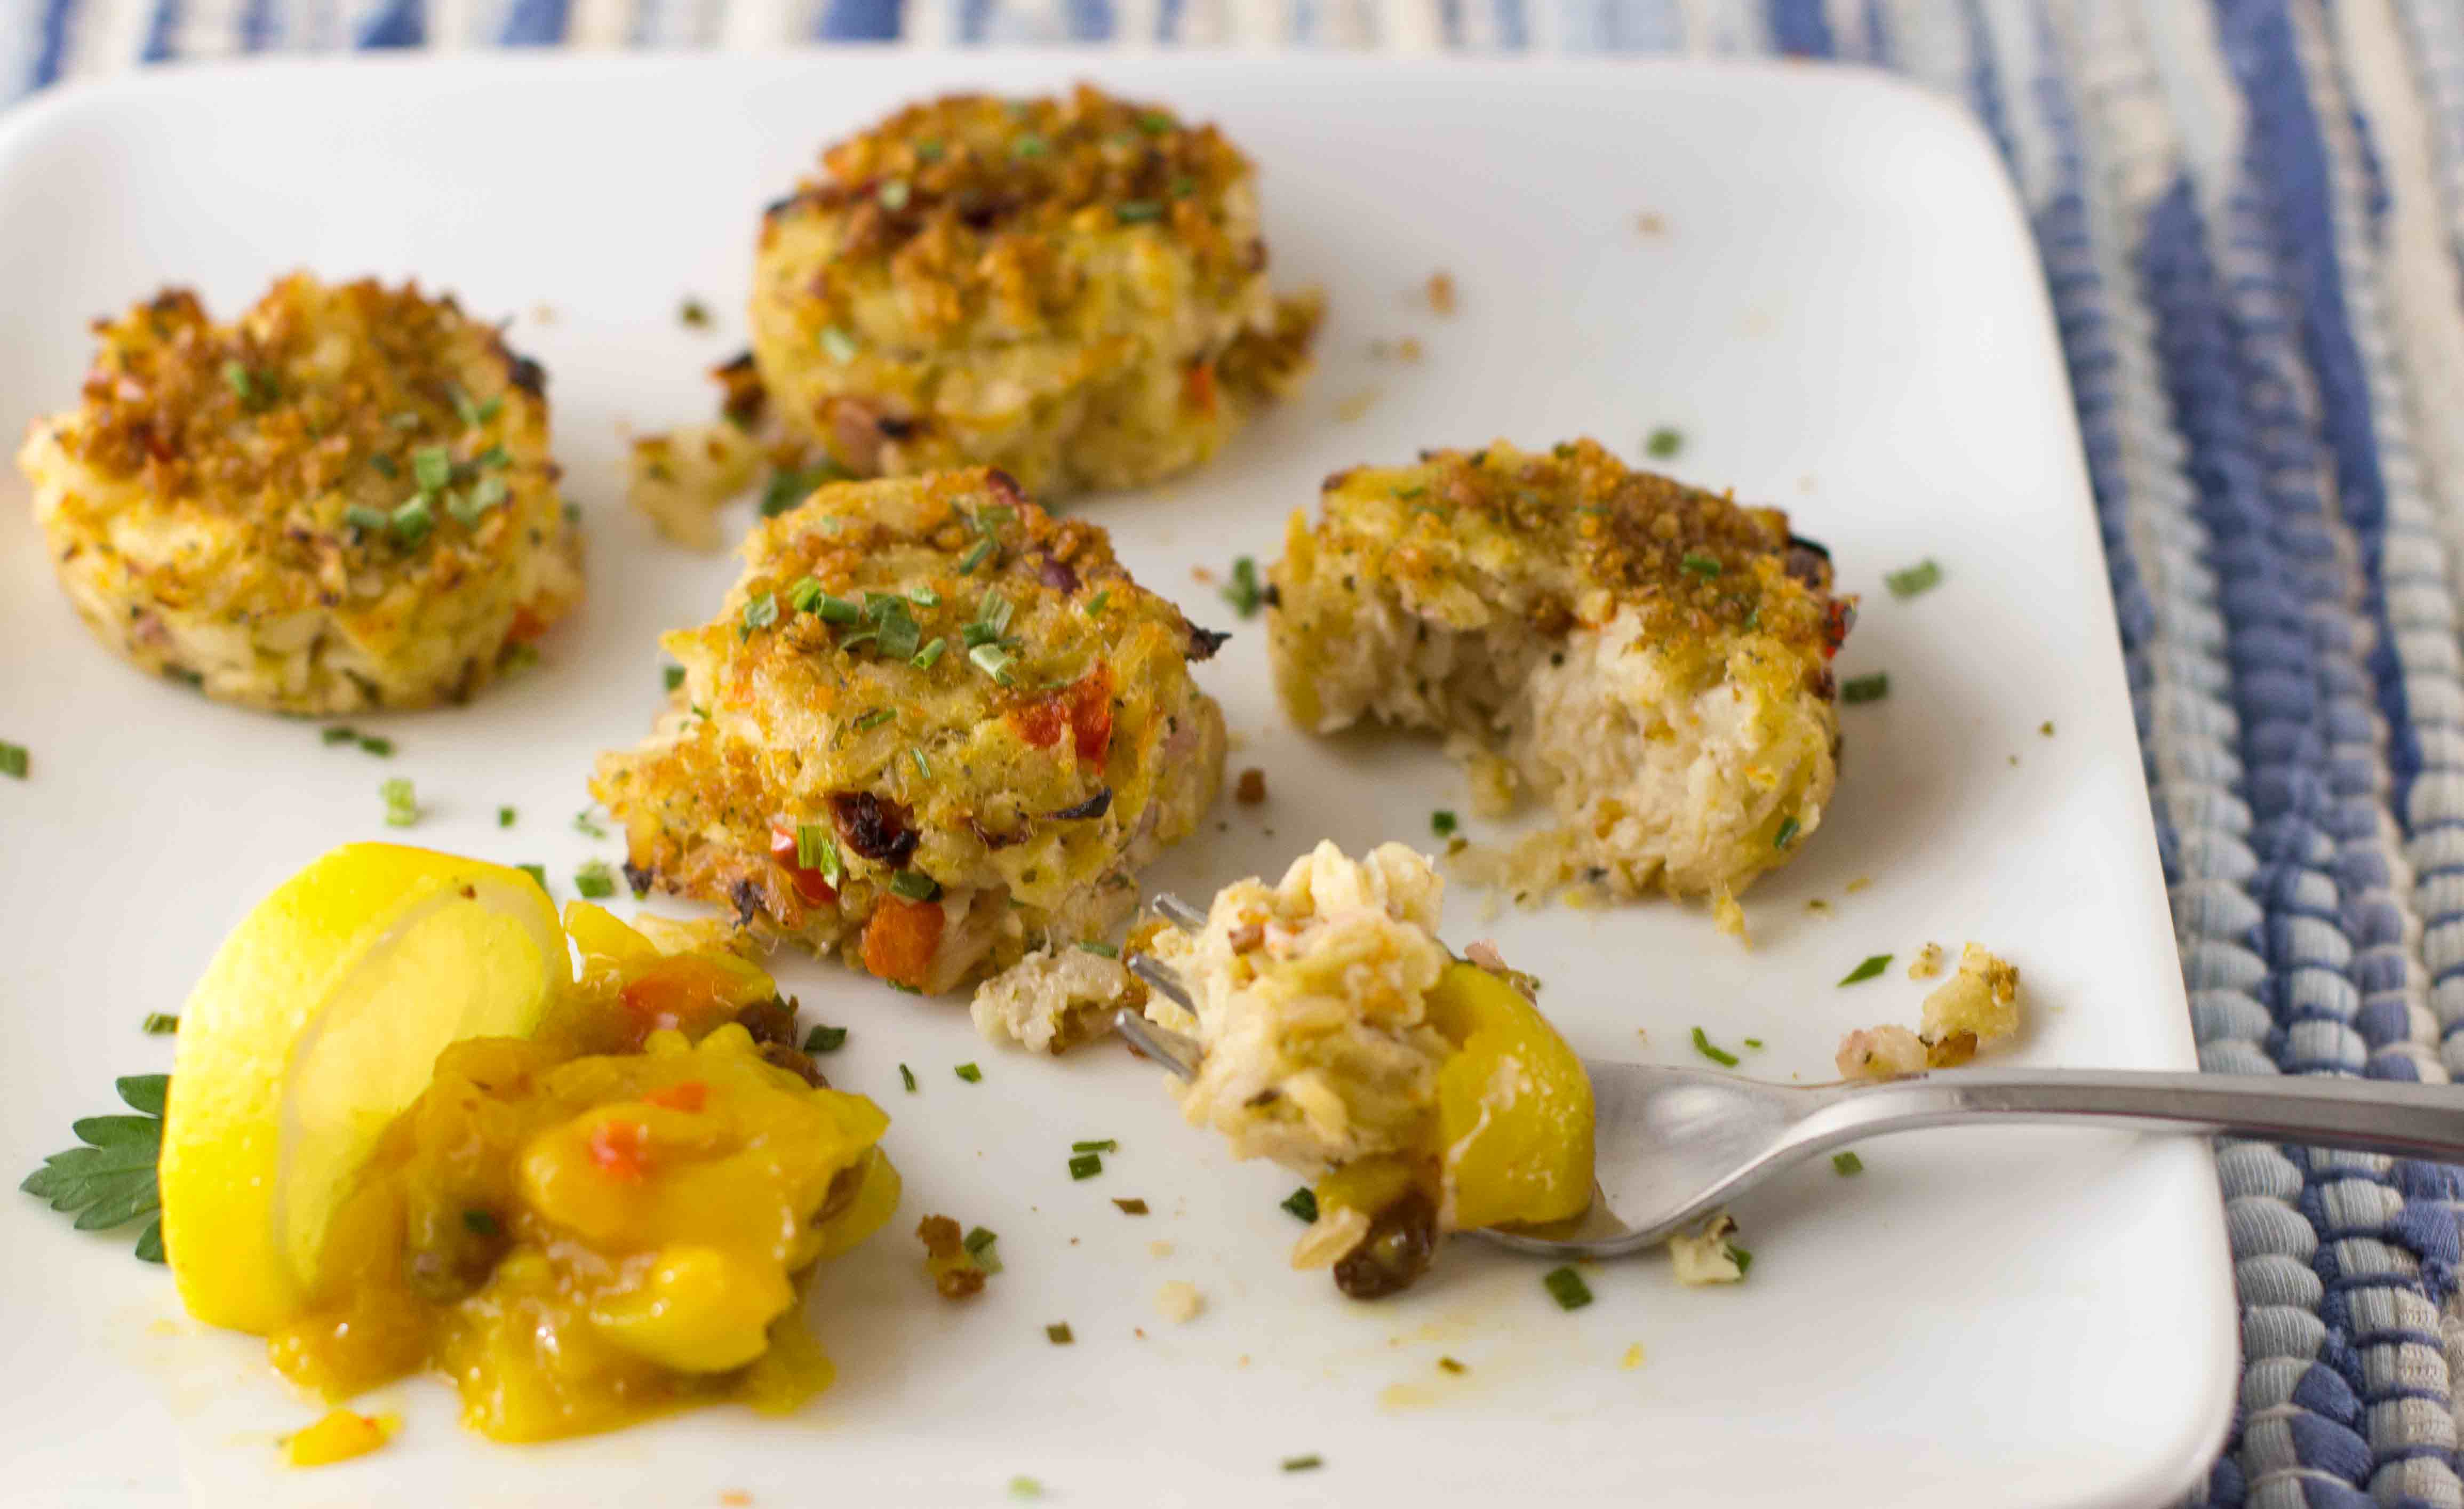 These vegan crab cakes are vegan, gluten free, healthy, baked and delicious. Baked or fried your family and friends will be amazed. veganglutenfreelife.com/vegan-crab-cakes